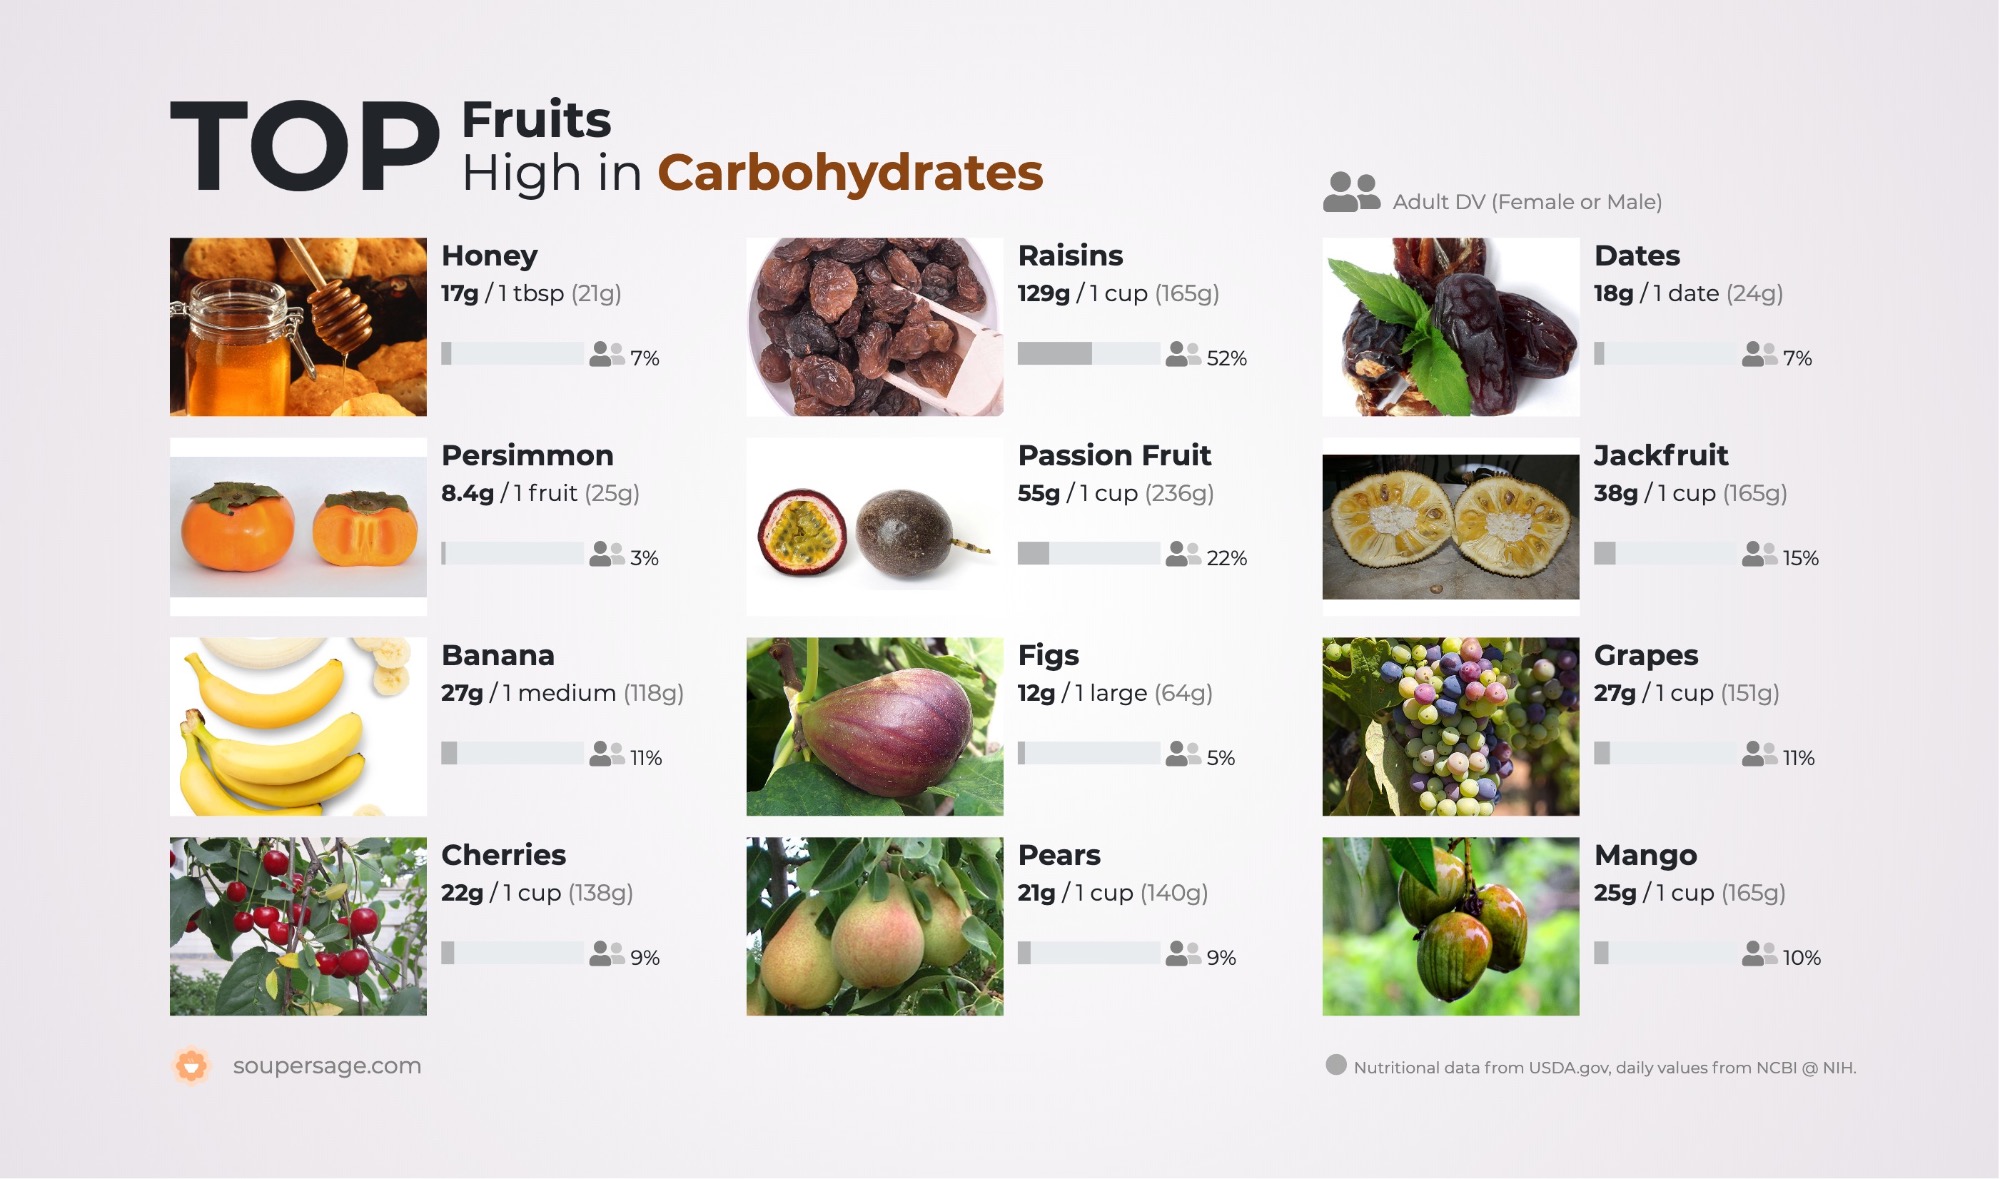 image of Top Fruits High in Carbohydrates